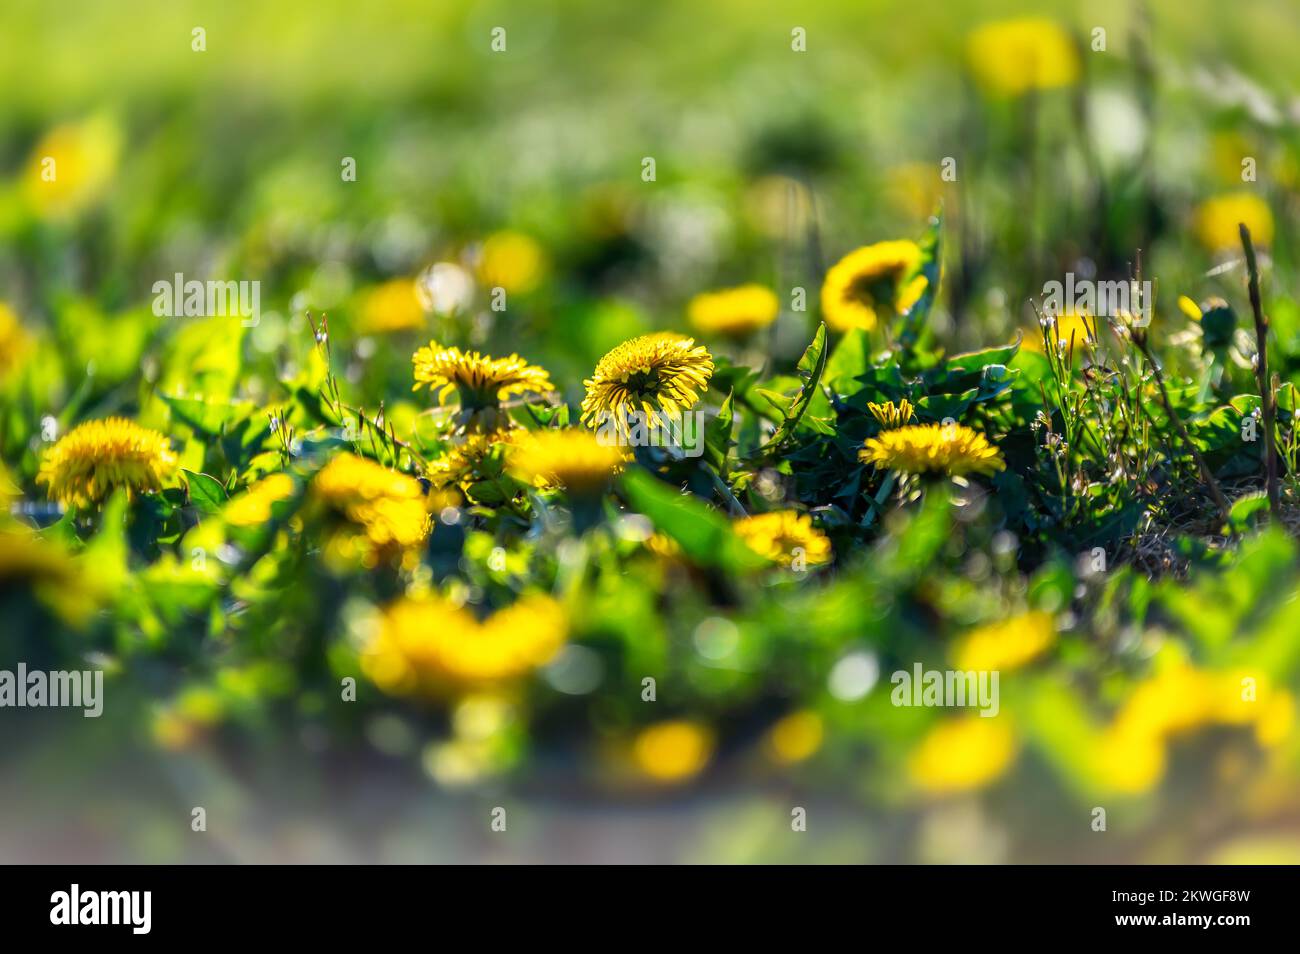 Wild meadow with dandelions in bloom Stock Photo